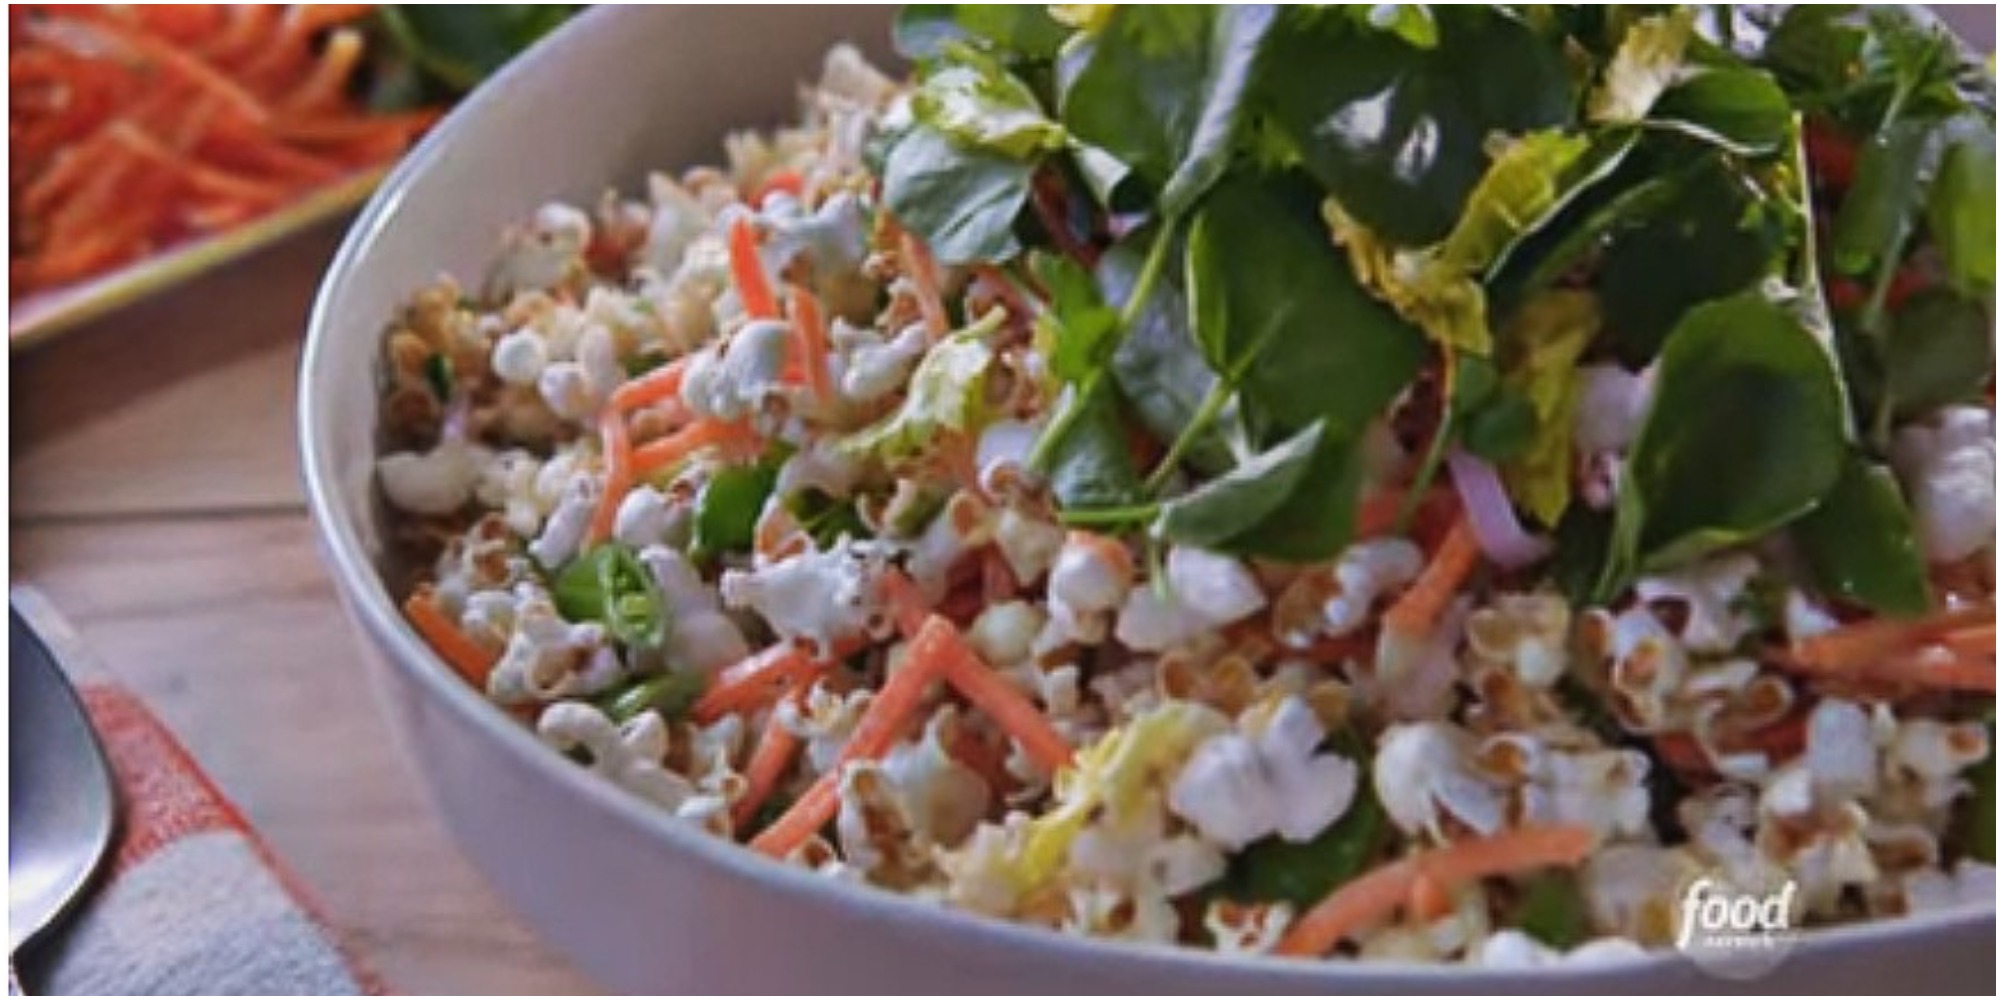 Molly Yeh pairs salty popcorn, crunch veggies and a creamy topping for her midwestern popcorn salad.